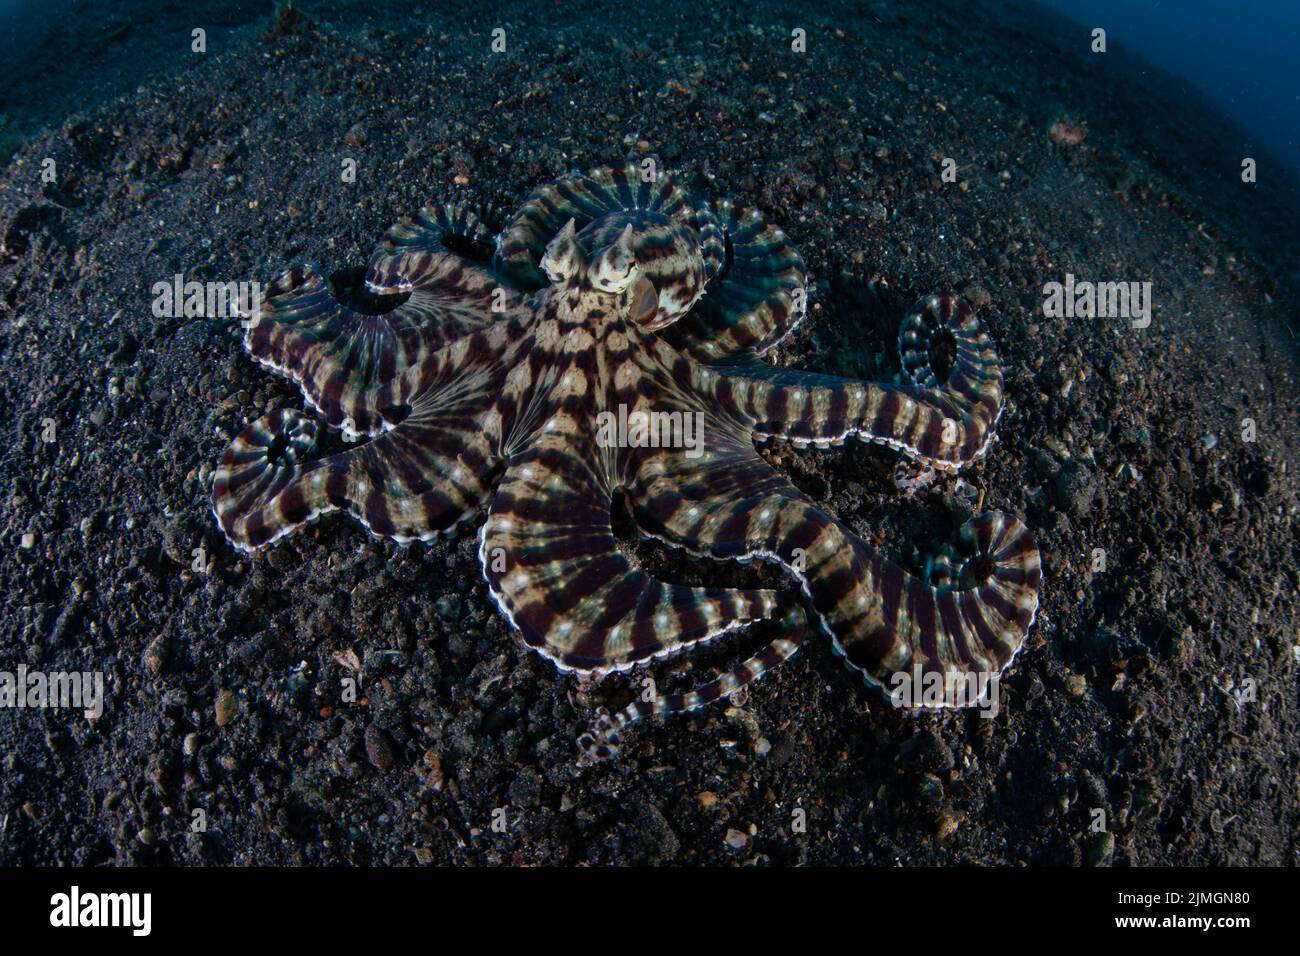 A Mimic octopus, Thaumoctopus mimicus, is found crawling across the black sand of Lembeh Strait, Indonesia. This unusual creature mimics other species. Stock Photo